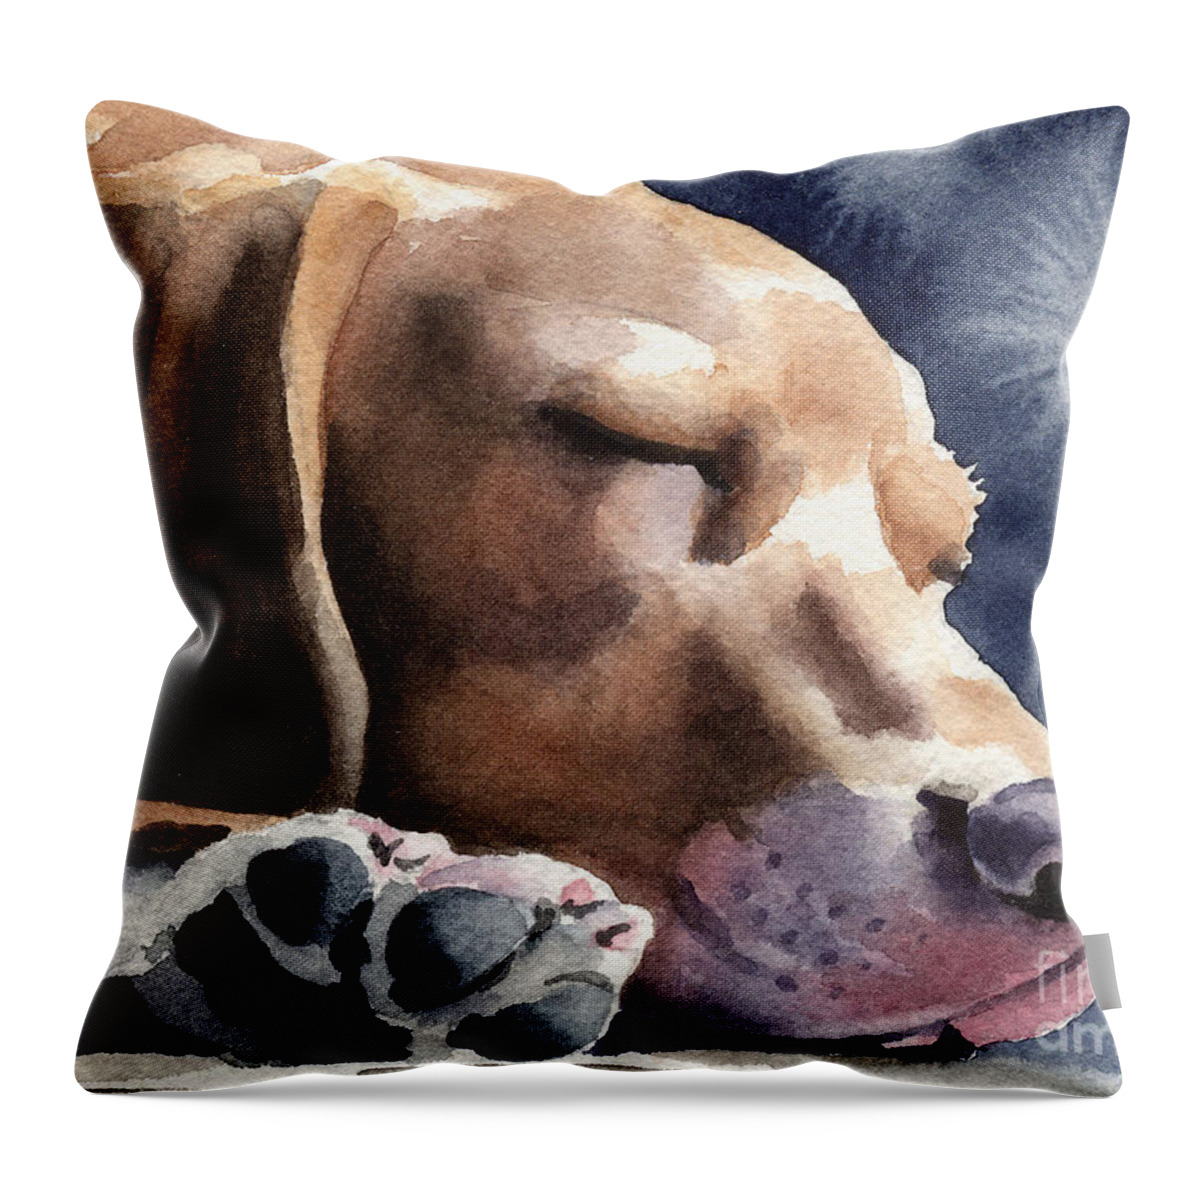 Beagle Throw Pillow featuring the painting Sleeping Beagle by David Rogers